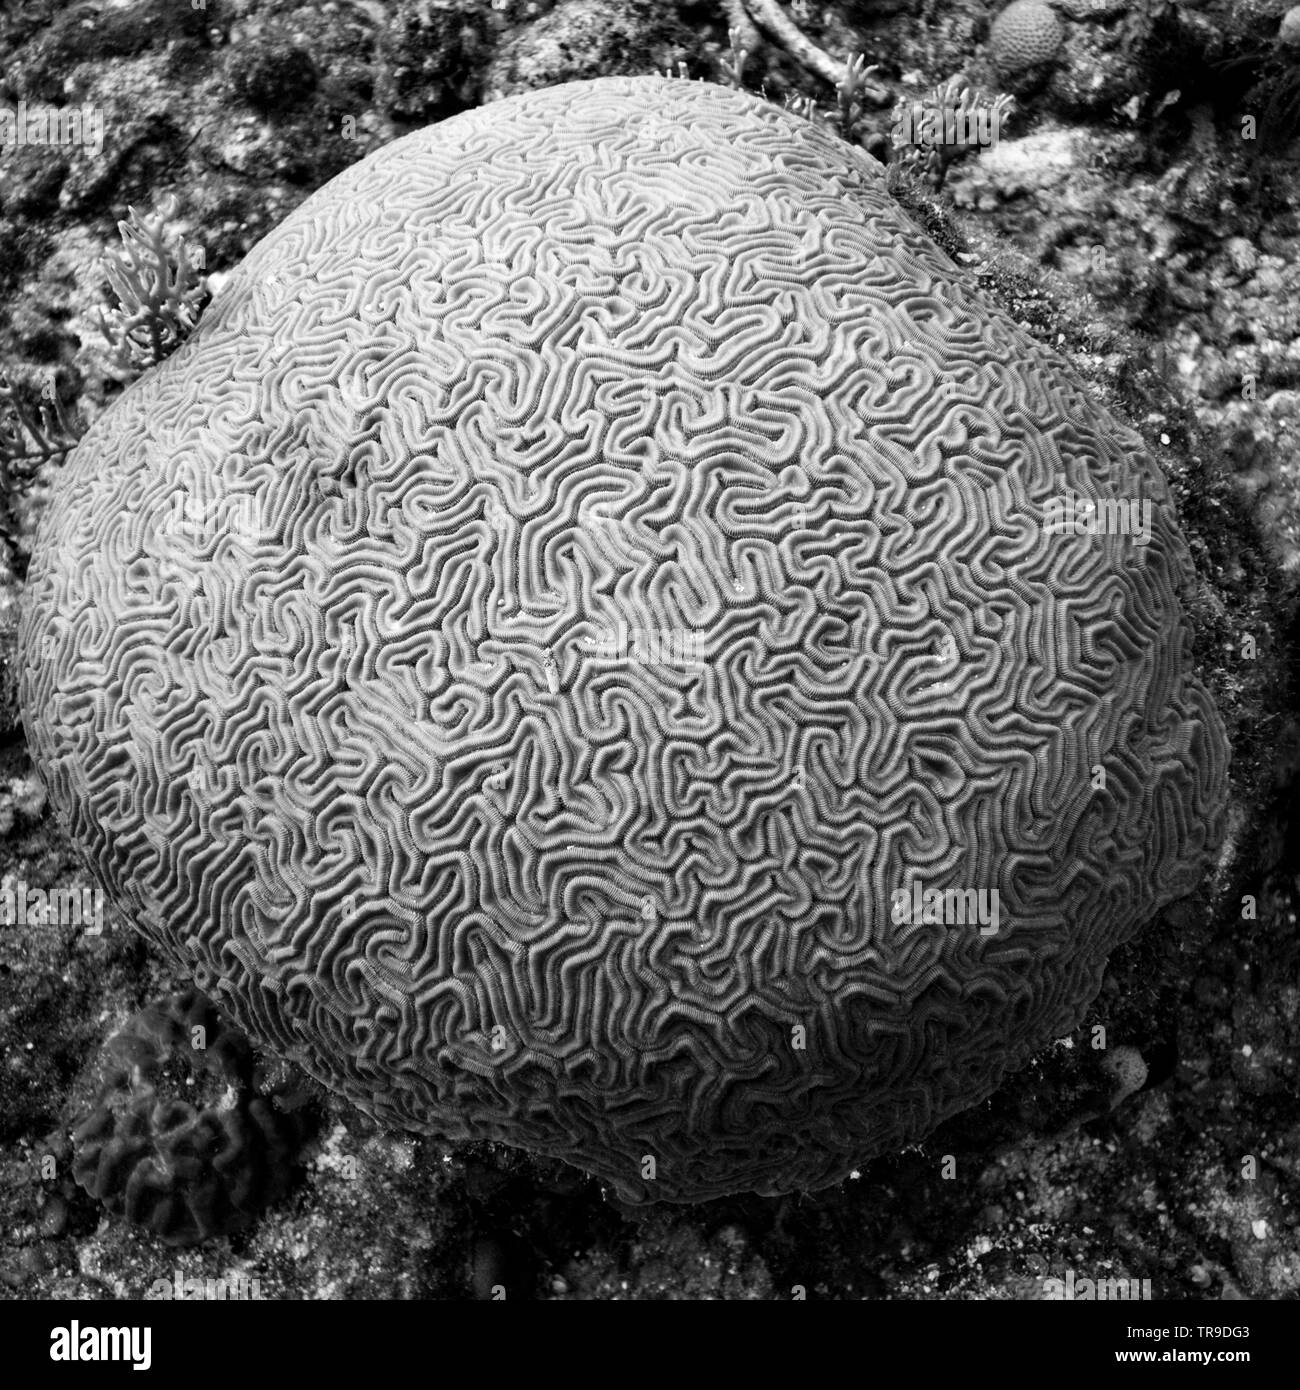 Details of brain coral underwater, Three Amigos, Turneffe Atoll, Belize Barrier Reef, Belize Stock Photo